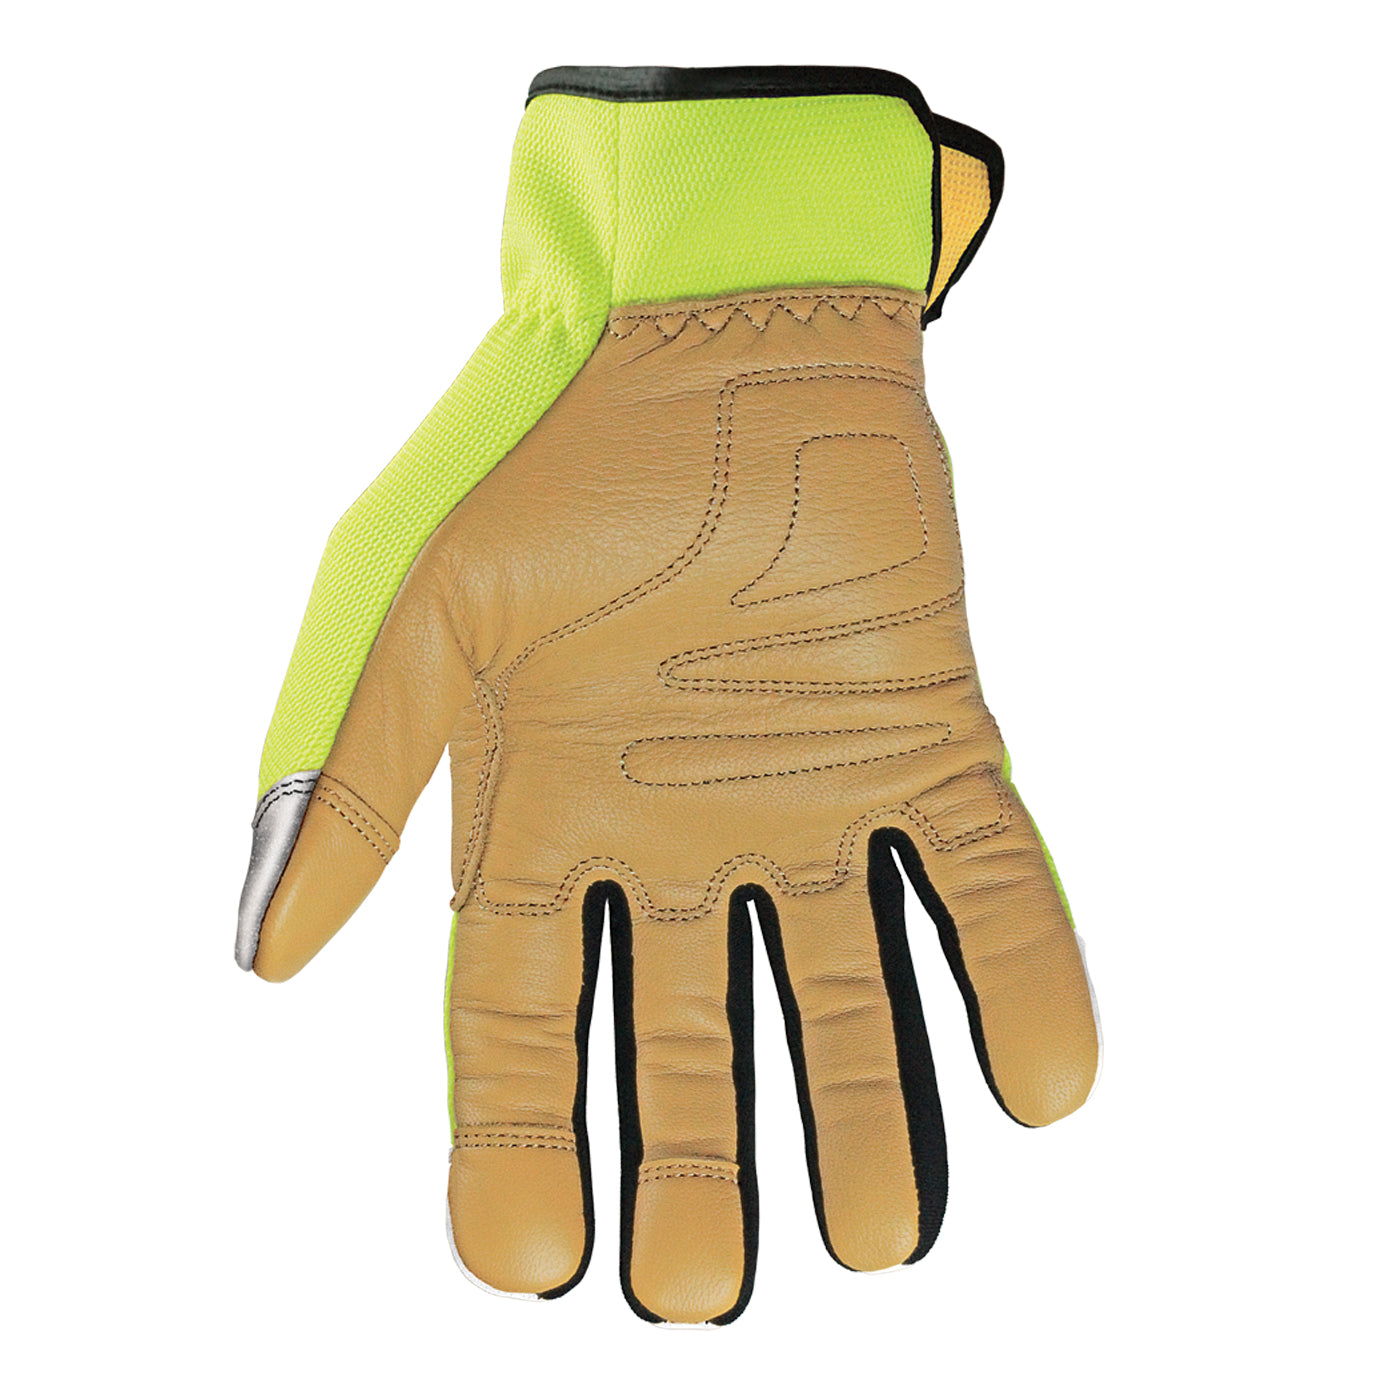 12-3190-10 Youngstown Cut Resistant Safety Lime Hybrid Glove - Main image